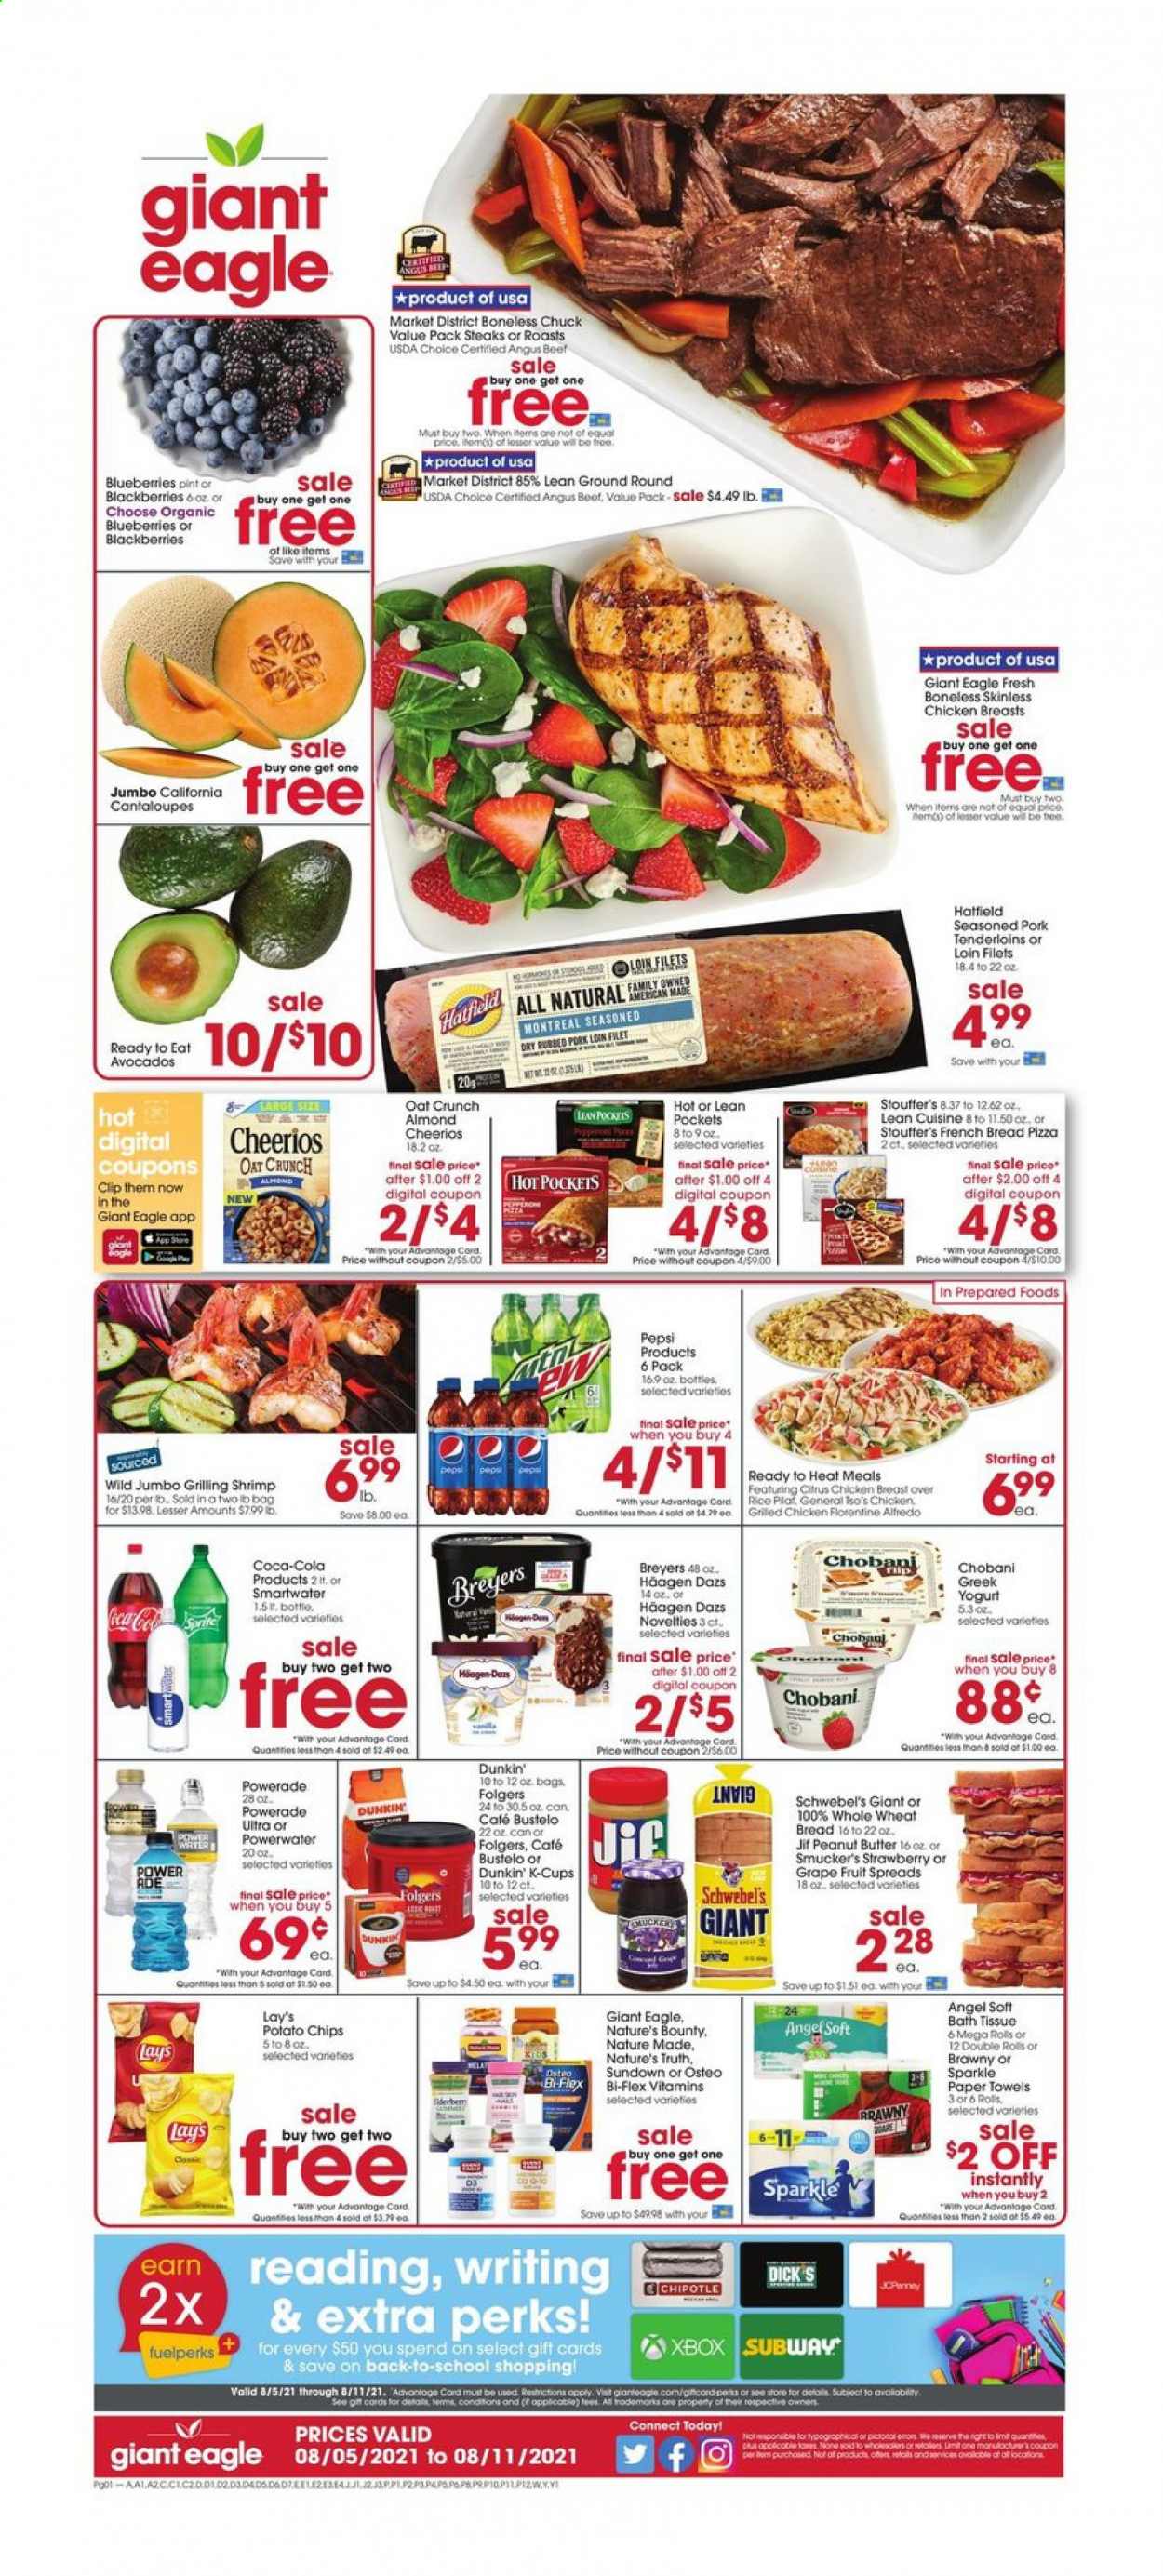 thumbnail - Giant Eagle Flyer - 08/05/2021 - 08/11/2021 - Sales products - wheat bread, french bread, cantaloupe, avocado, blackberries, blueberries, shrimps, pizza, Lean Cuisine, yoghurt, Chobani, Häagen-Dazs, Stouffer's, potato chips, chips, Lay’s, oats, Cheerios, rice, peanut butter, Jif, Coca-Cola, Powerade, Pepsi, Smartwater, Folgers, coffee capsules, K-Cups, chicken breasts, beef meat, steak, pork loin, pork meat, pork tenderloin, bath tissue, kitchen towels, paper towels, Nature Made, Nature's Bounty, Nature's Truth, Osteo bi-flex, Bi-Flex. Page 1.